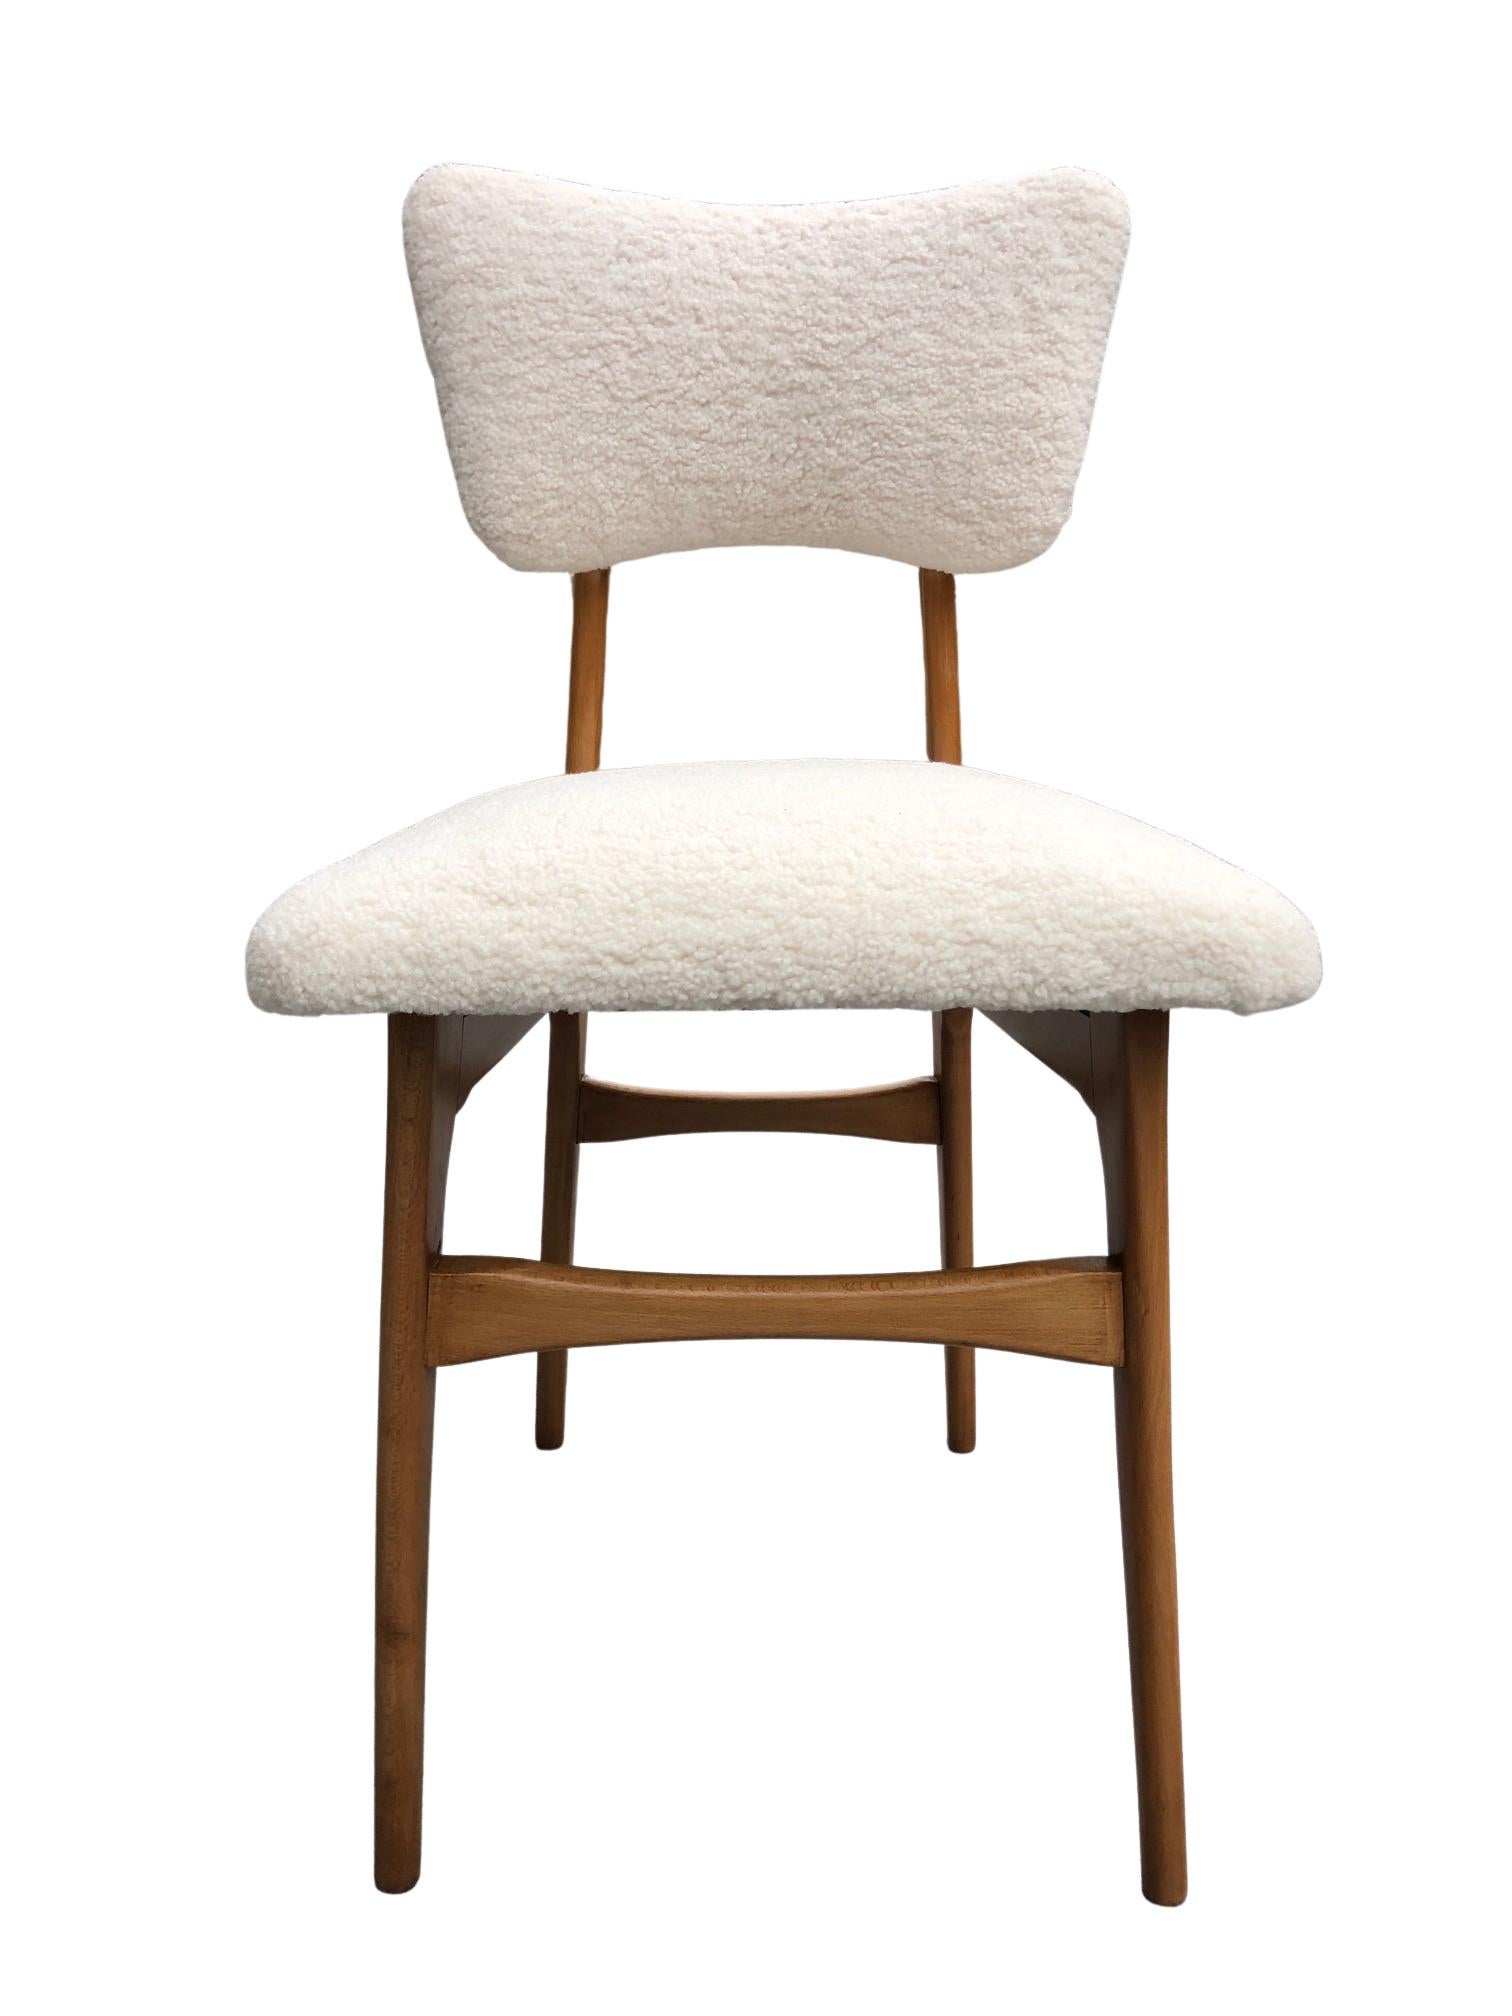 Mid-Century Modern Midcentury Cream Bouclé and Wood Dining Chair, Europe, 1960s For Sale